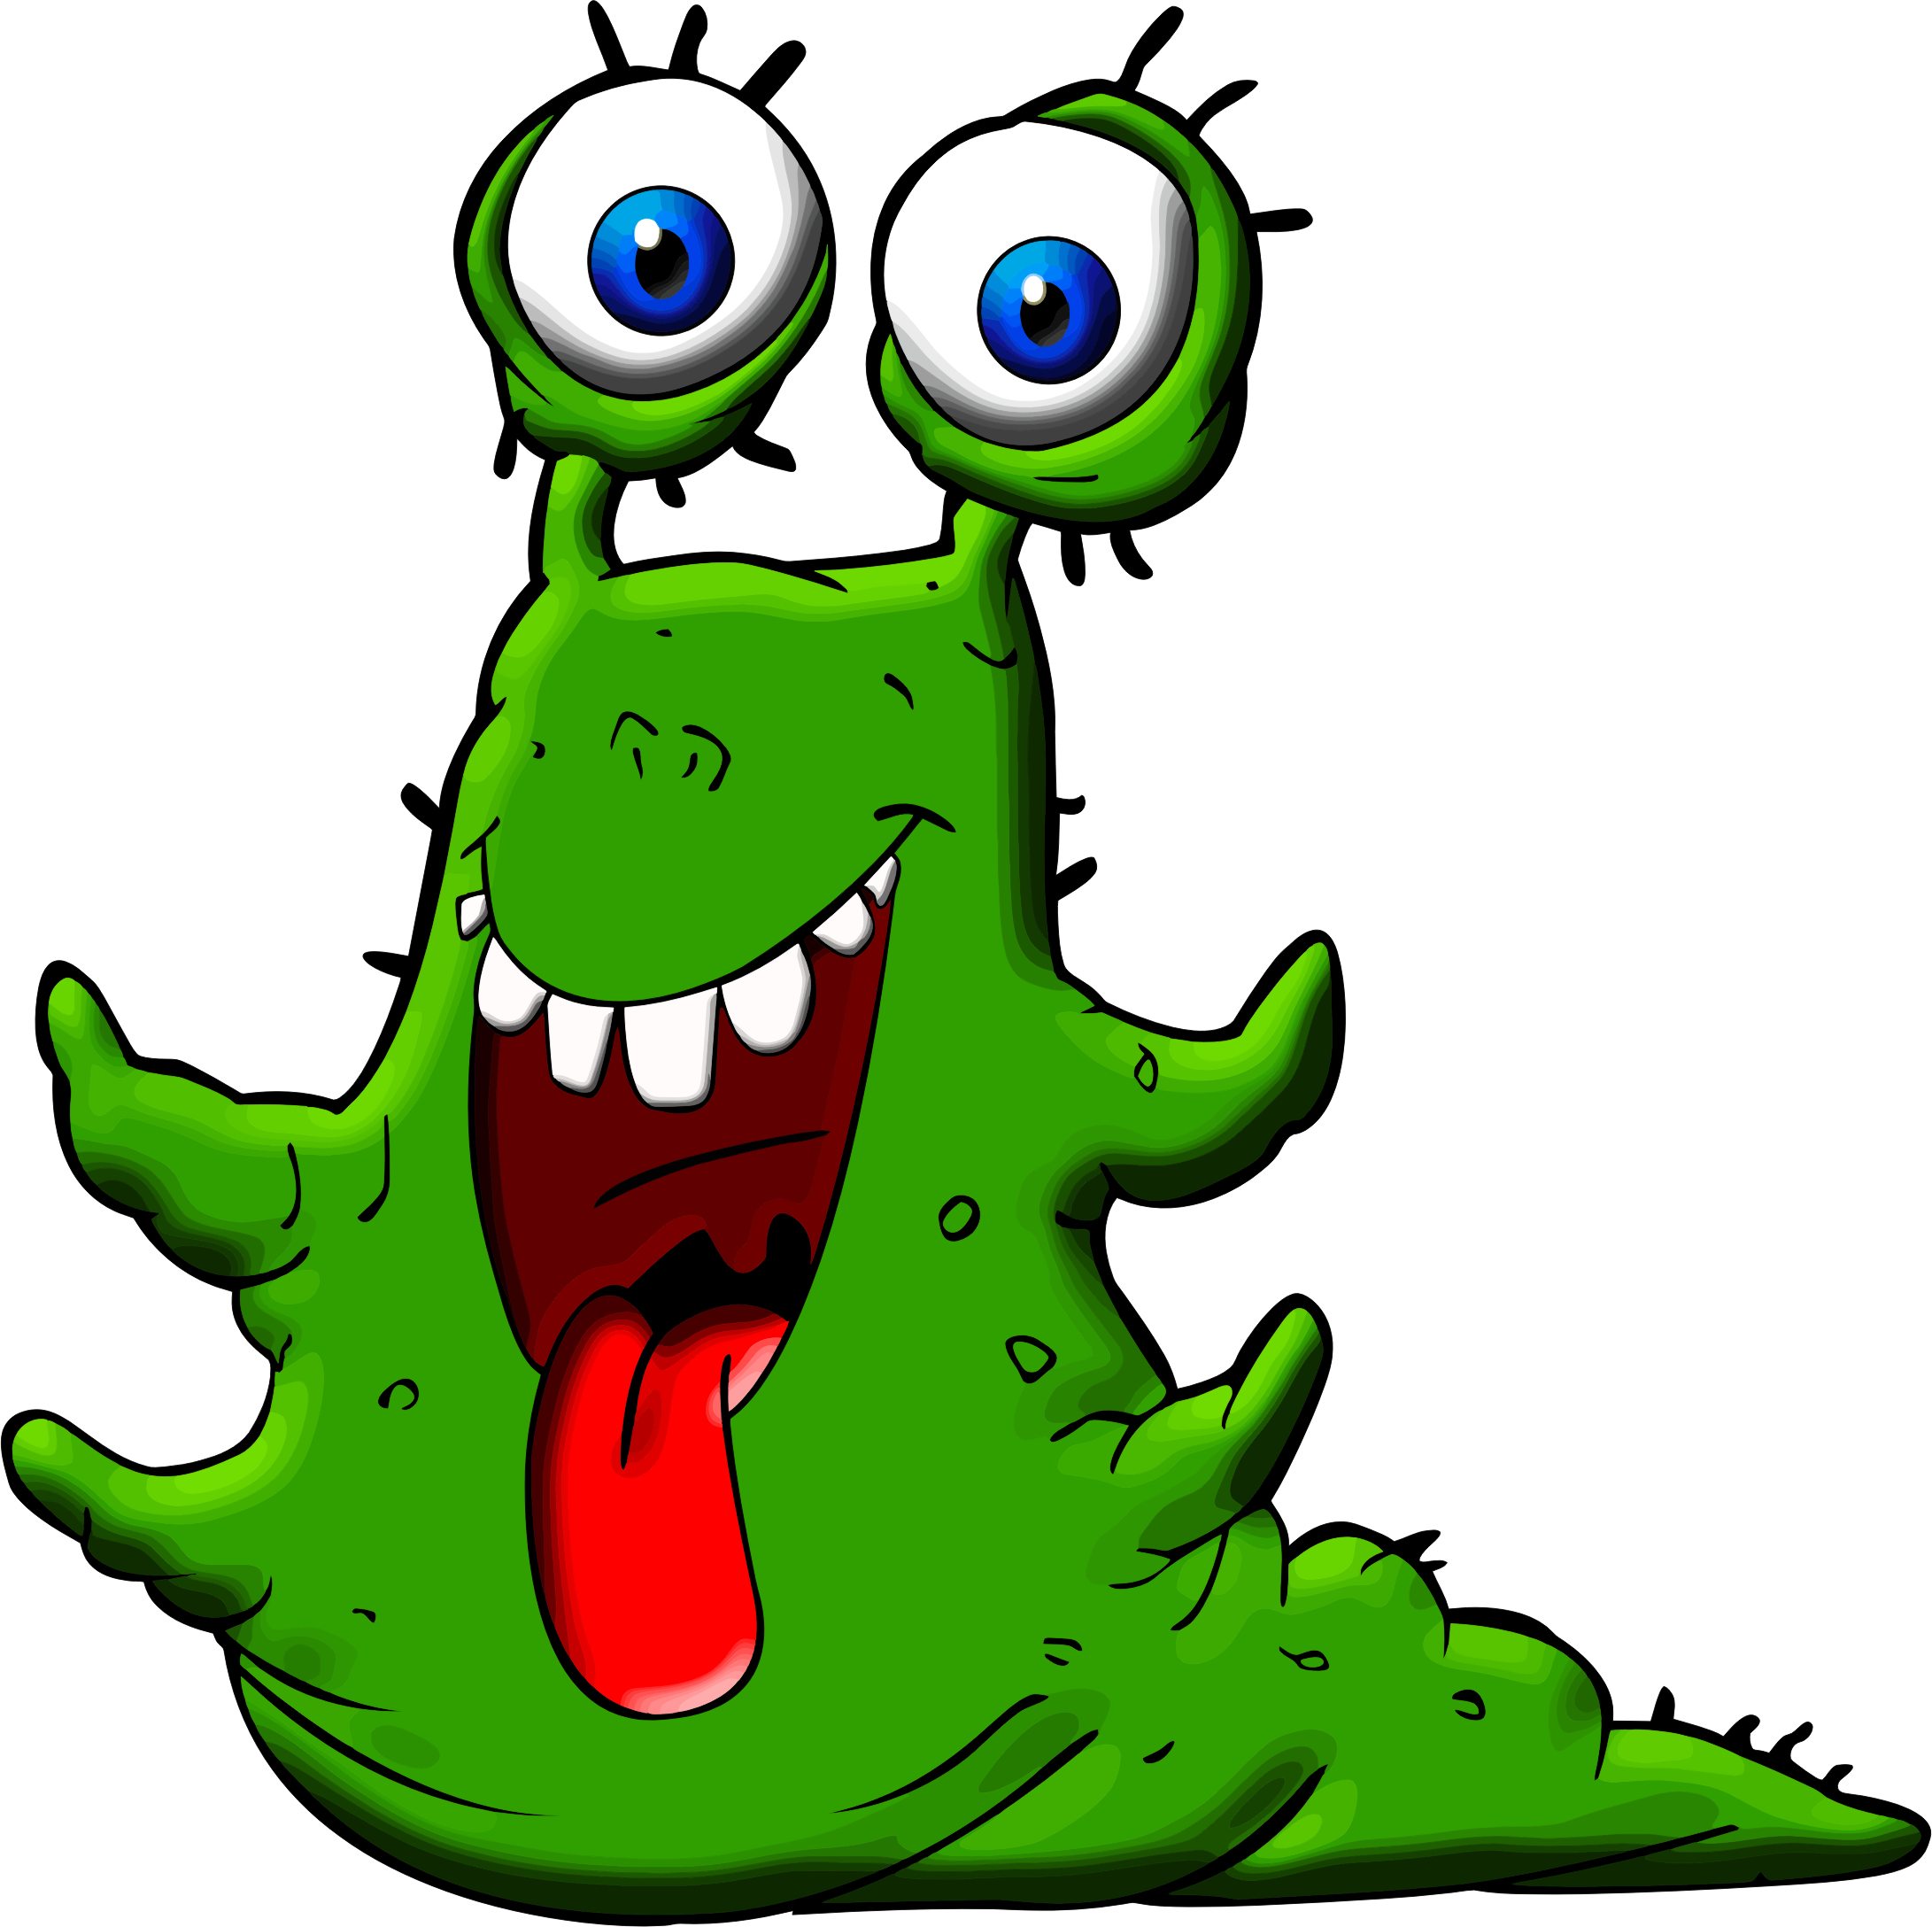 Image result for monster. Zucchini clipart pipino